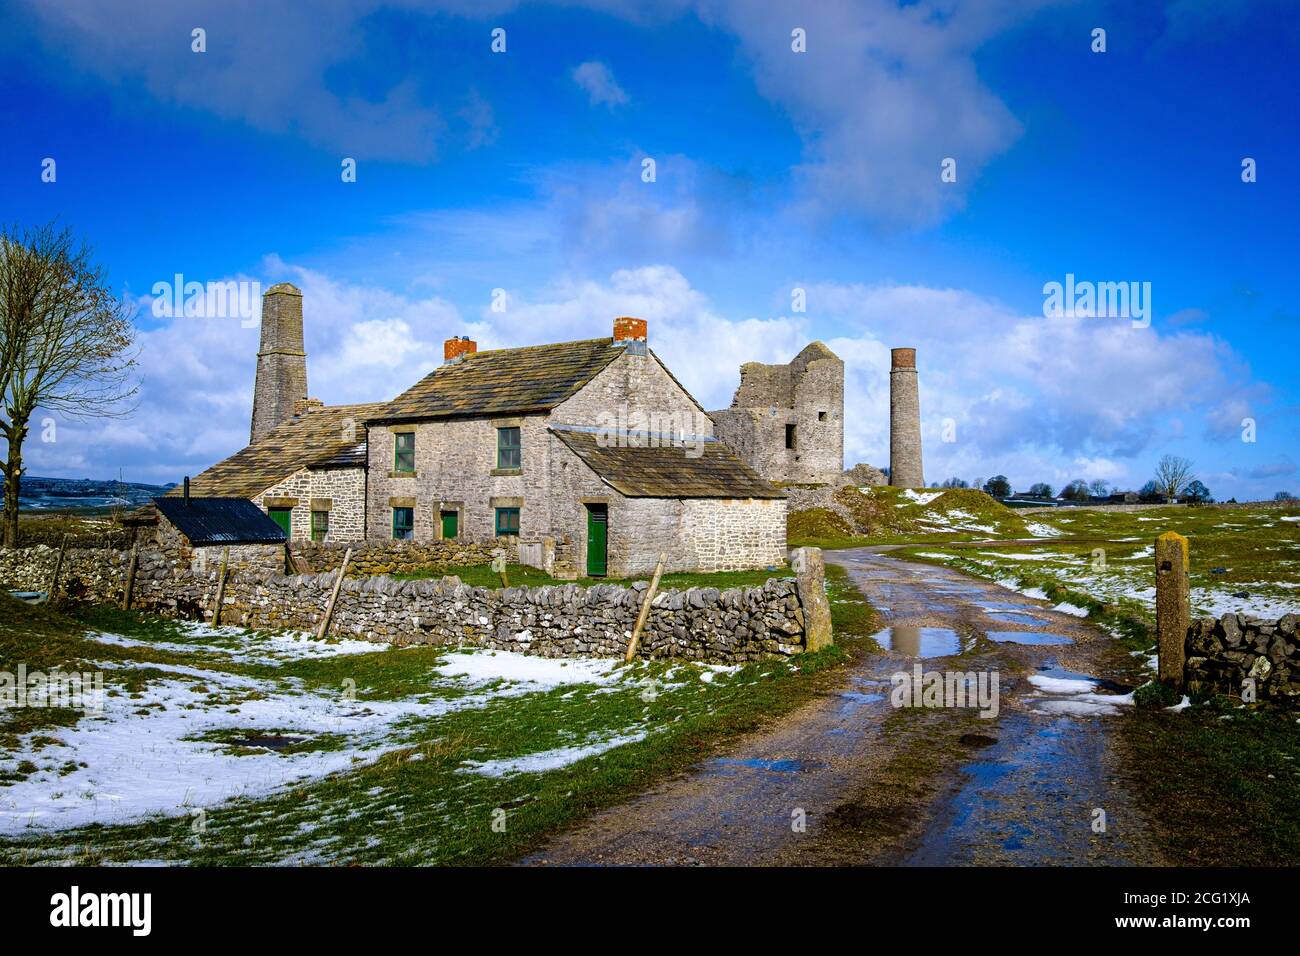 The Magpie Mine, was one of the most famous lead mines in the Peak District. Stock Photo